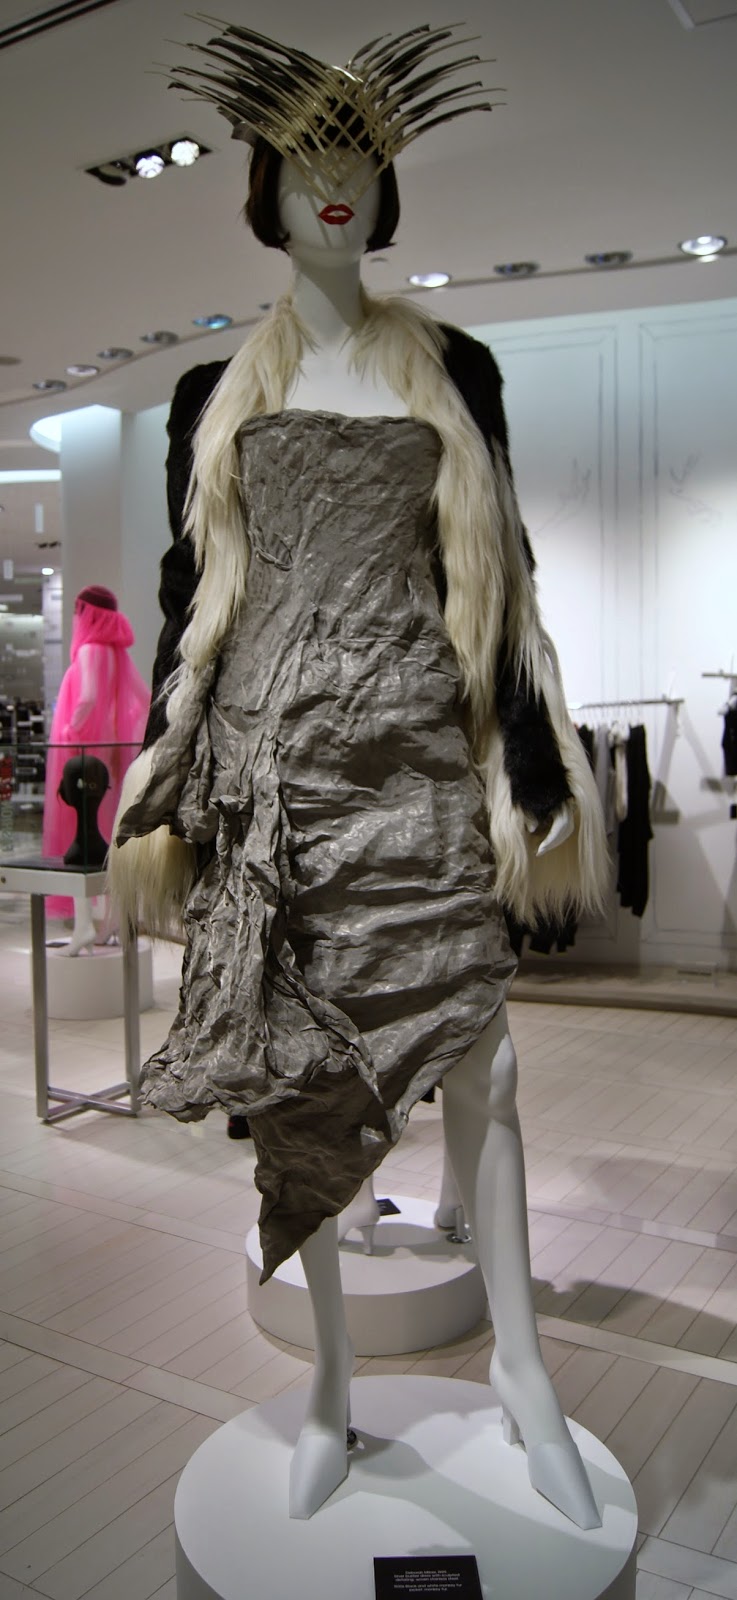 Fashion Blows Exhibit at Hudson's Bay in Toronto, Isabella, Daupne Guinness, Style, Culture, foundation, alexander mcqueen, philip treacy, suicide,the purple scarf, melanie.ps, ontario, canada, the room, Comme Des Garcons, jacket, pink tulle shirt, spring, summer, fall, winter, sculpted hat net, Deborah Milner, Silver Bustier Dress, 1930, Monkey Fur Jacket